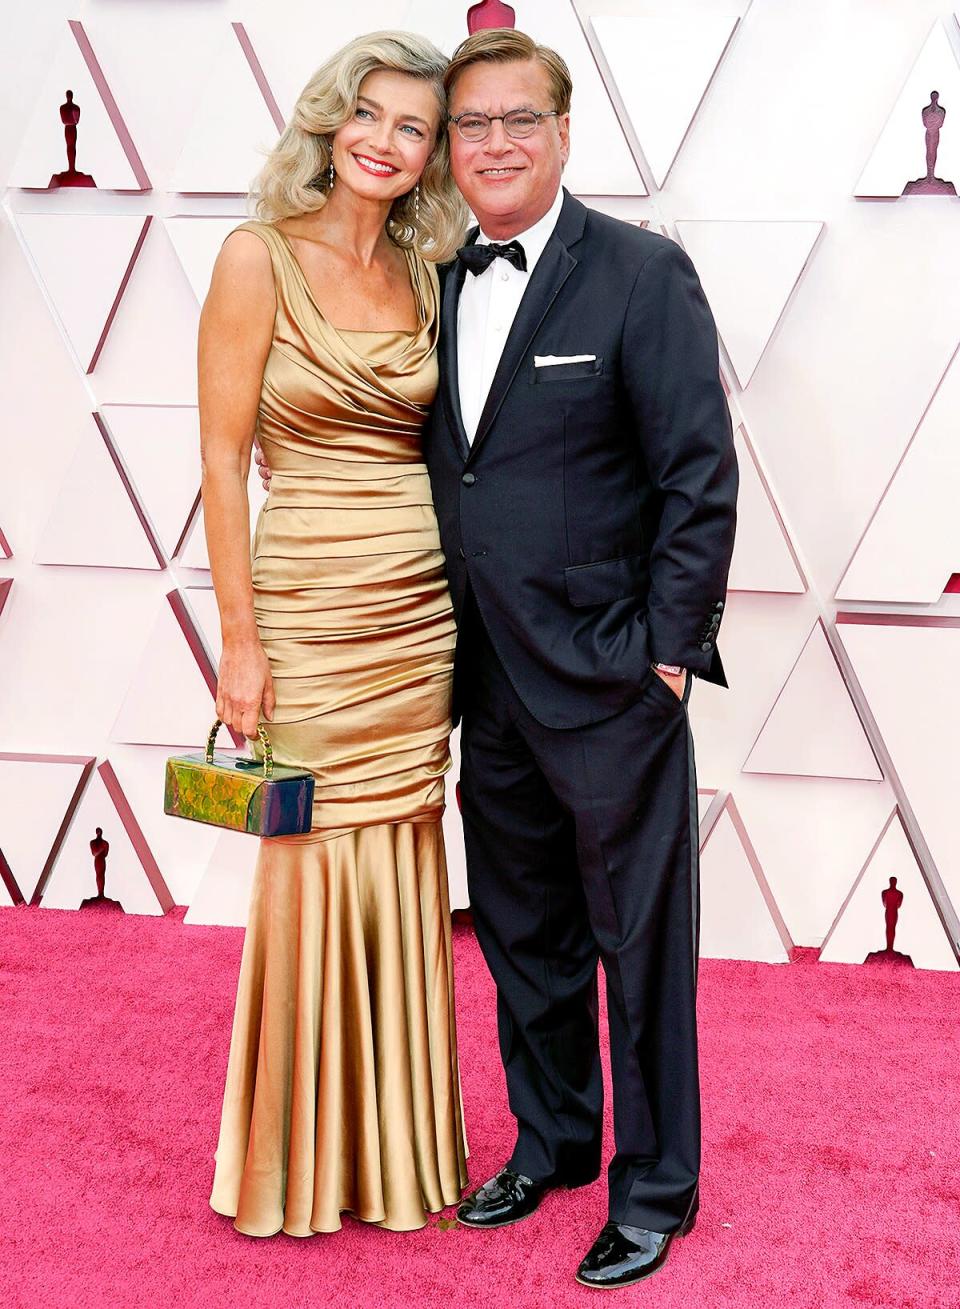 Paulina Porizkova (L) and Aaron Sorkin attends the 93rd Annual Academy Awards at Union Station on April 25, 2021 in Los Angeles, California.